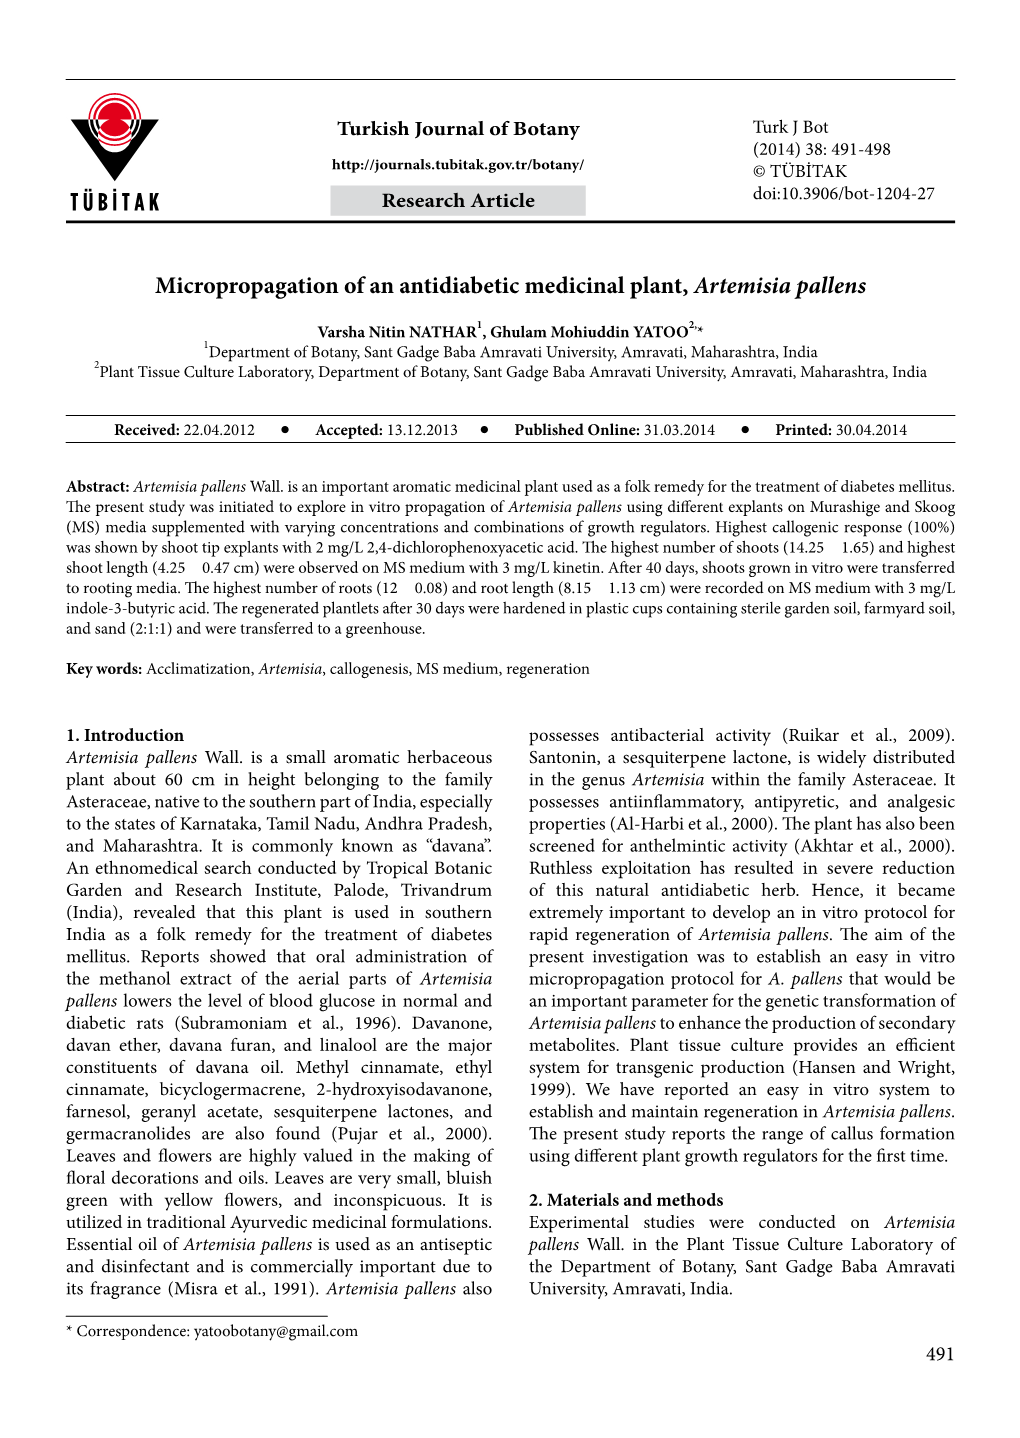 Micropropagation of an Antidiabetic Medicinal Plant, Artemisia Pallens